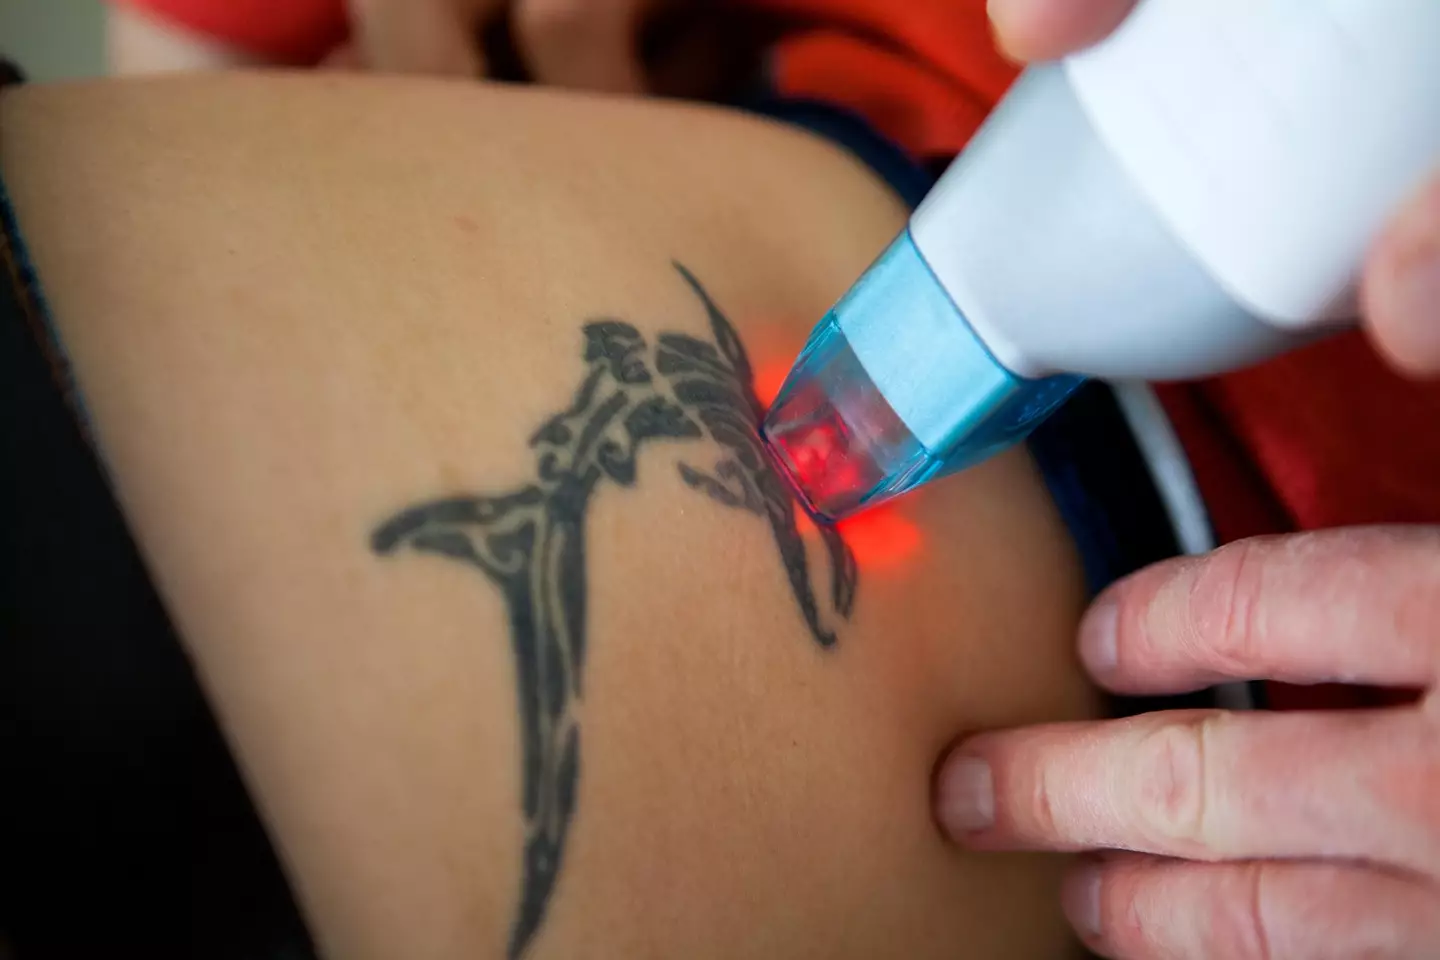 The laser is only one aspect of the tattoo removal process.